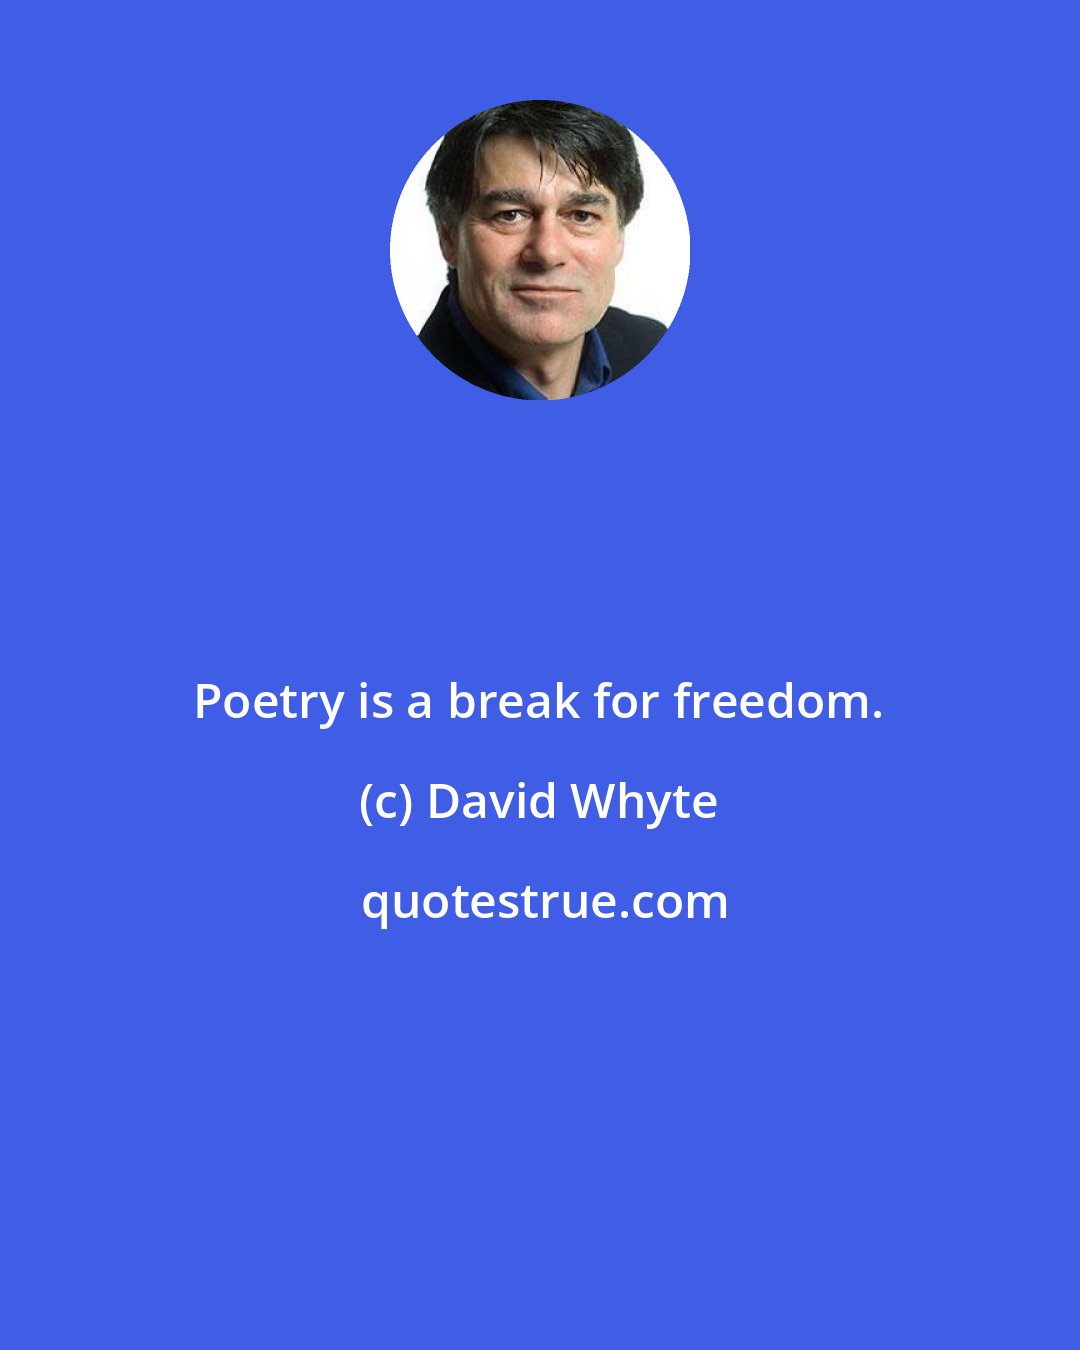 David Whyte: Poetry is a break for freedom.